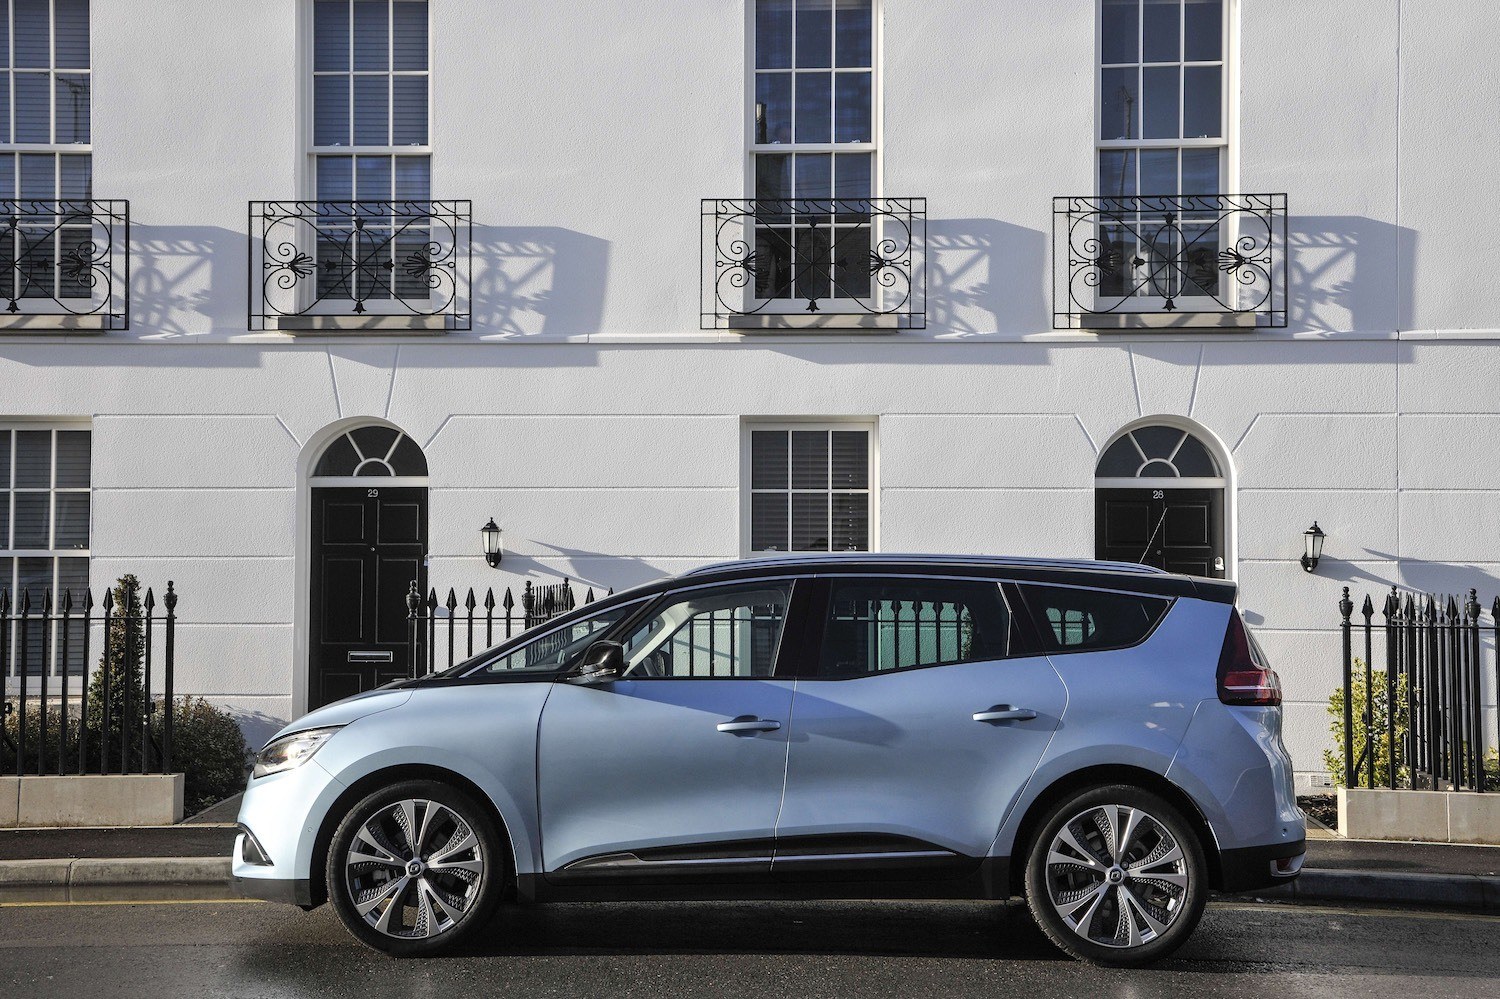 Neil Lyndon reviews the lates Renault Scenic for Drive 17